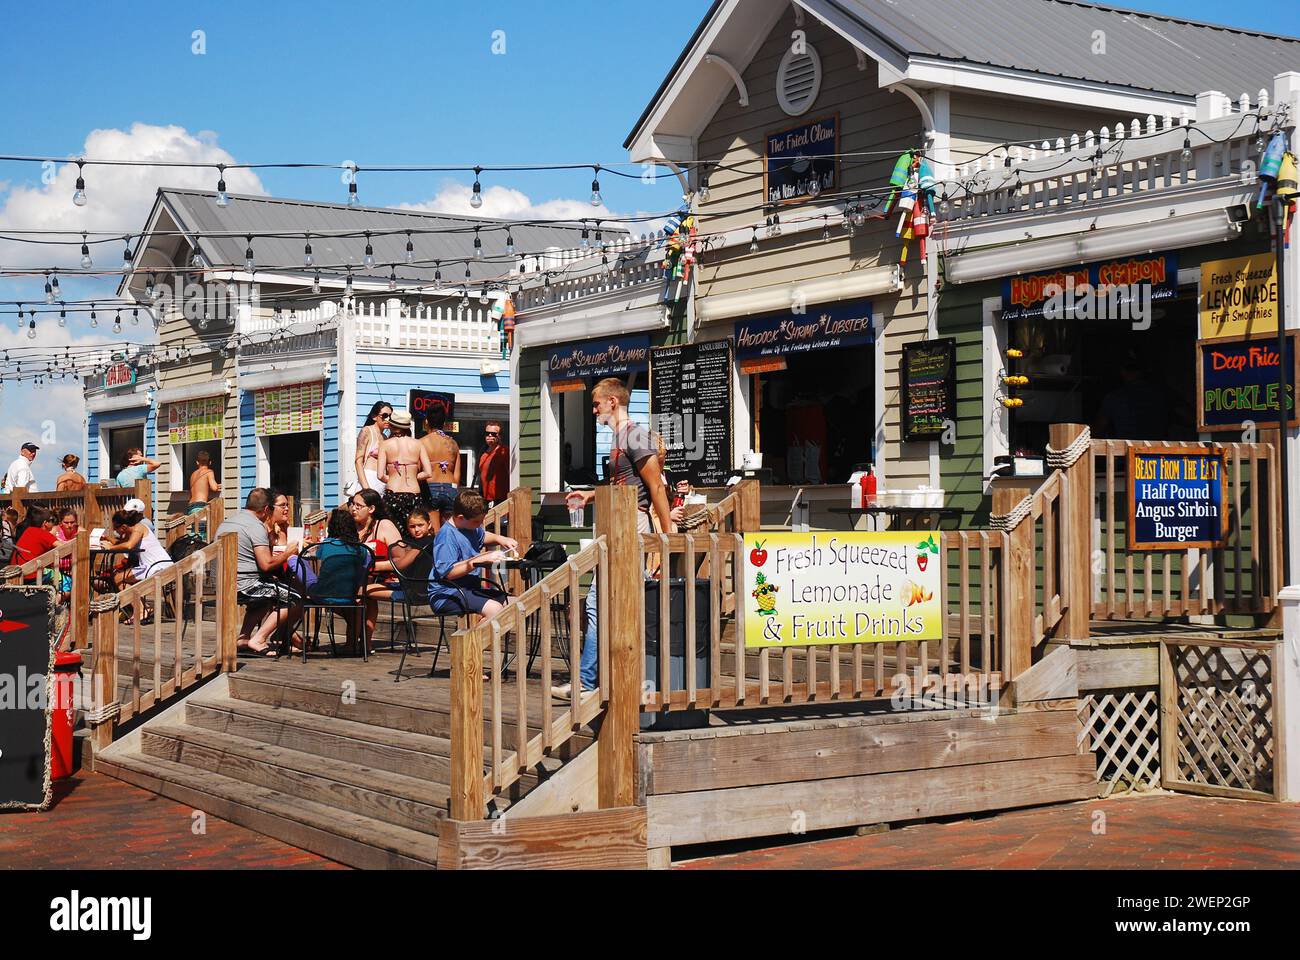 A crowd of people enjoy lunch on a summer vacation day at an outdoor cafe in Old Orchard Beach, Maine Stock Photo